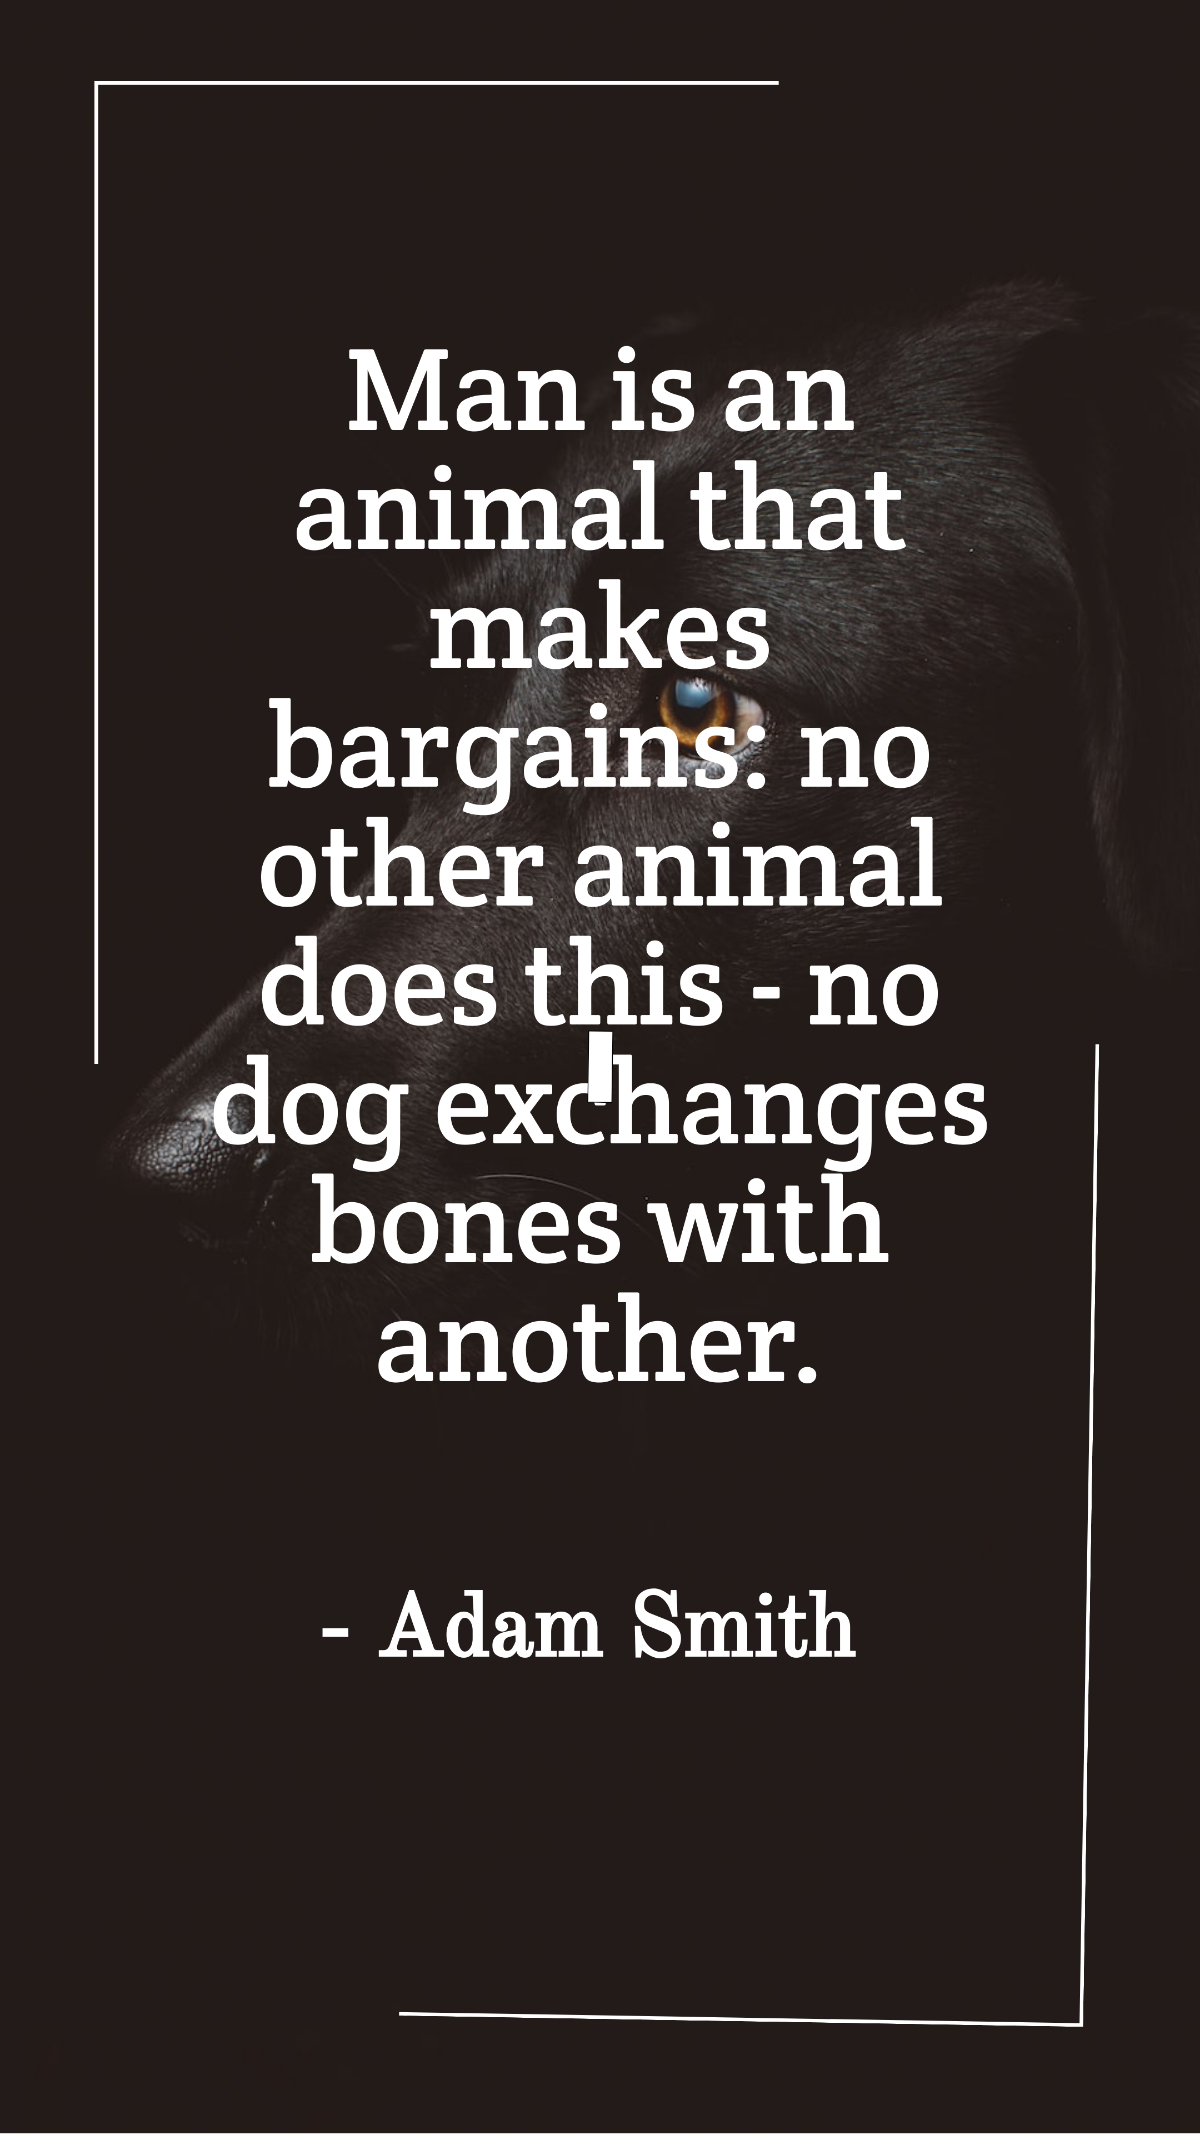 Adam Smith - Man is an animal that makes bargains: no other animal does this - no dog exchanges bones with another. Template